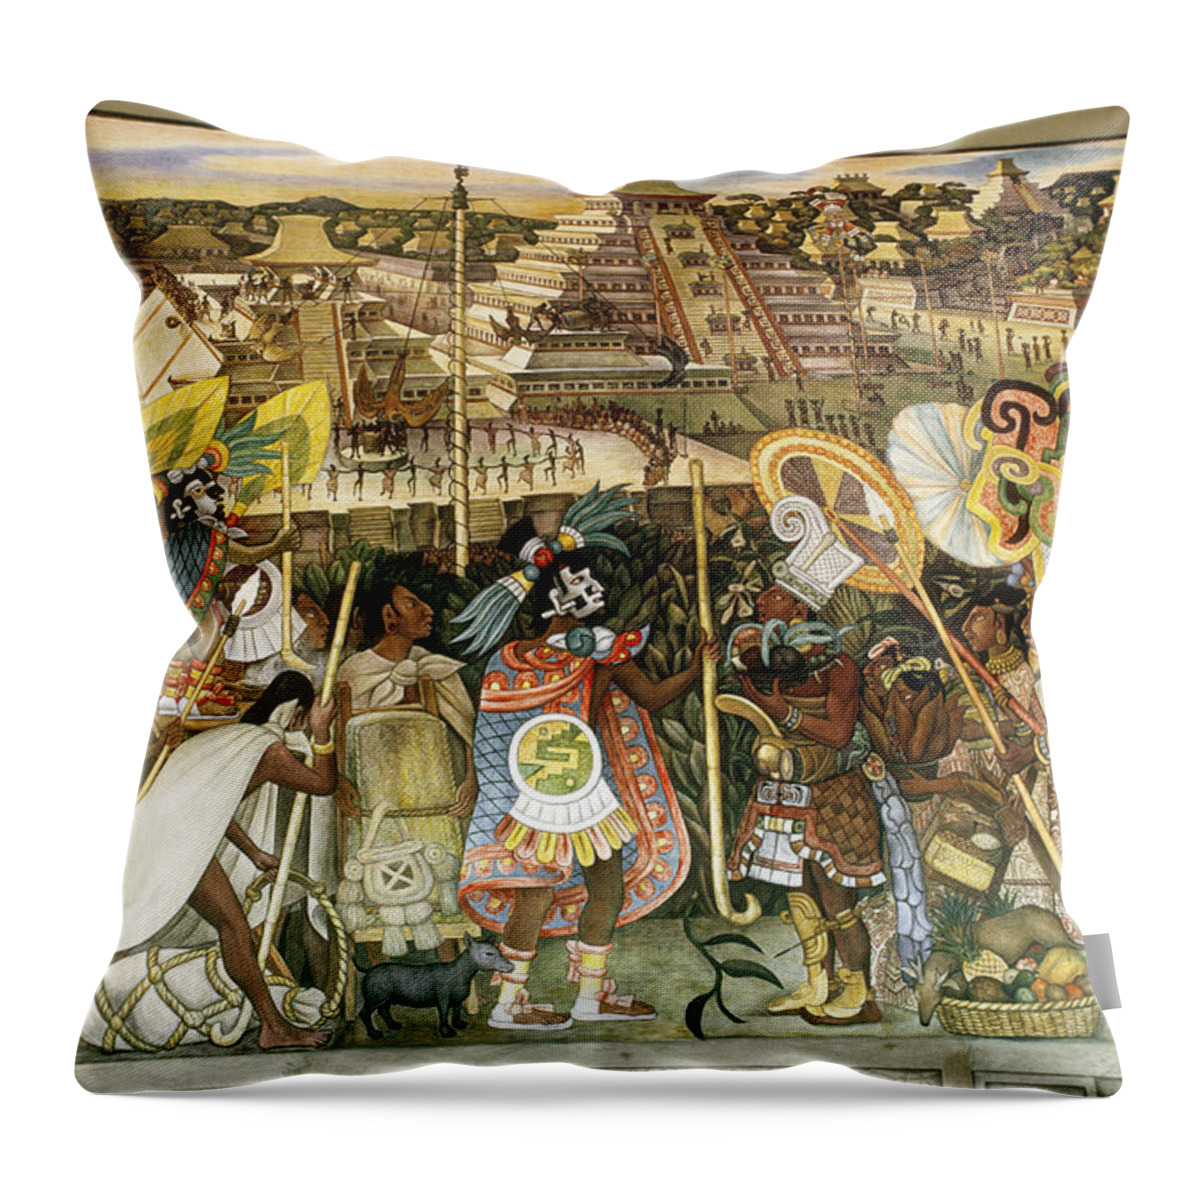 Mexico Throw Pillow featuring the painting Diego Rivera Mural by Dick Davis